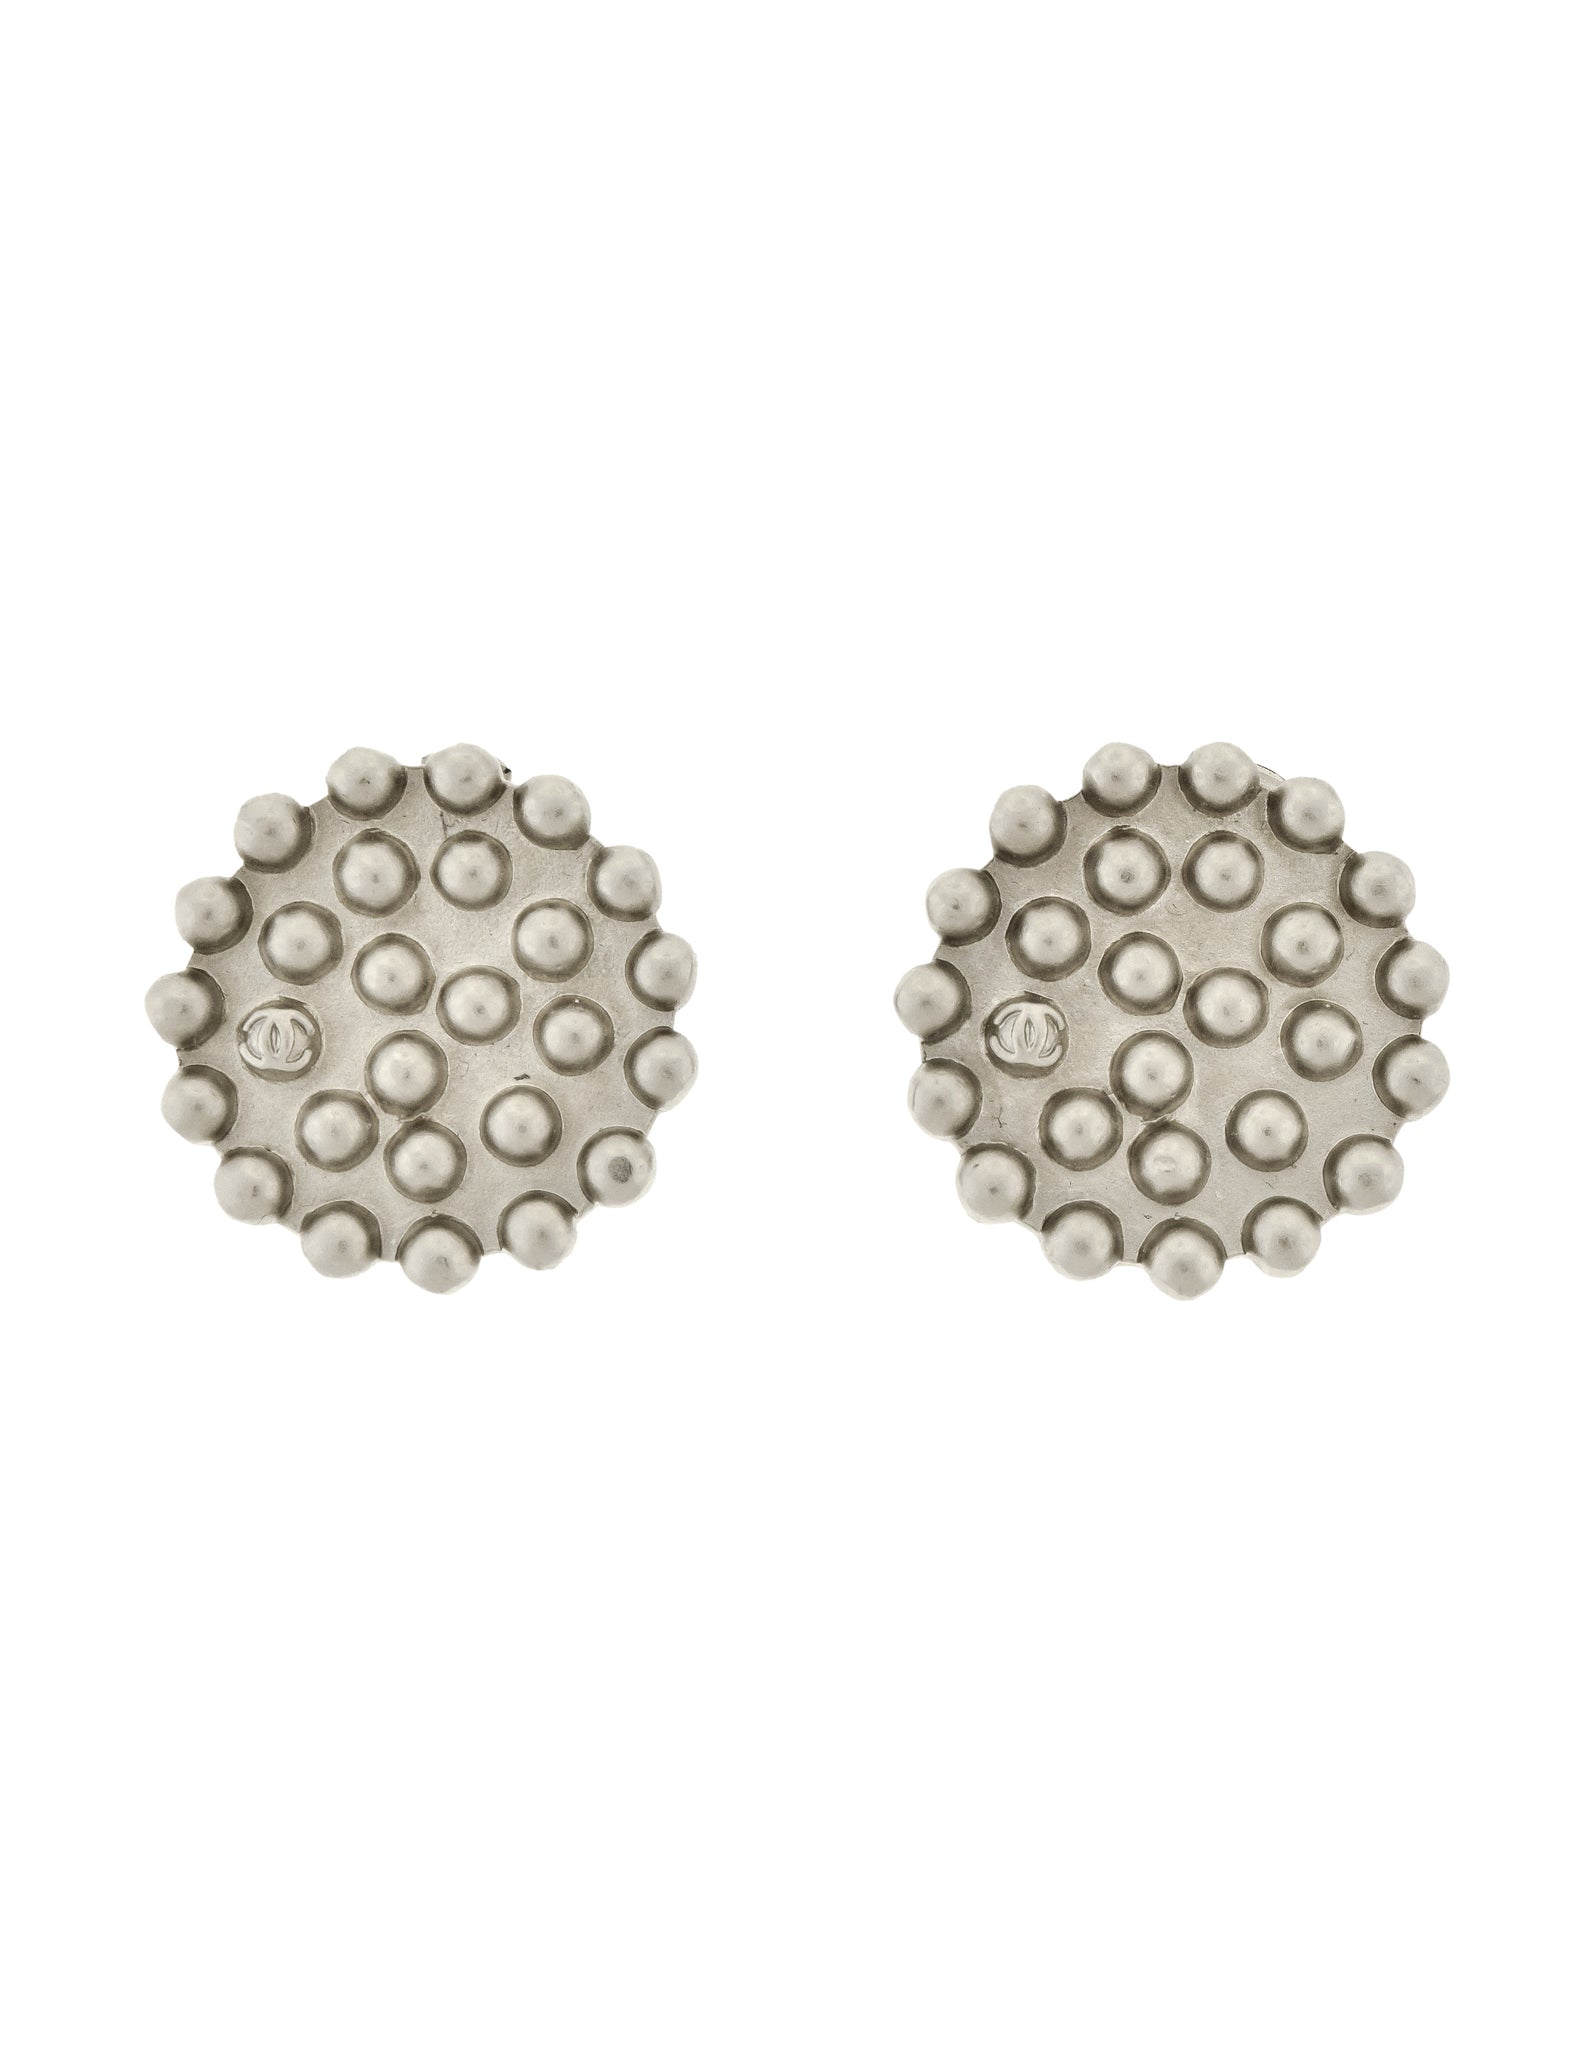 Chanel Vintage 1998 Silver Round 3D Dot Button Earrings